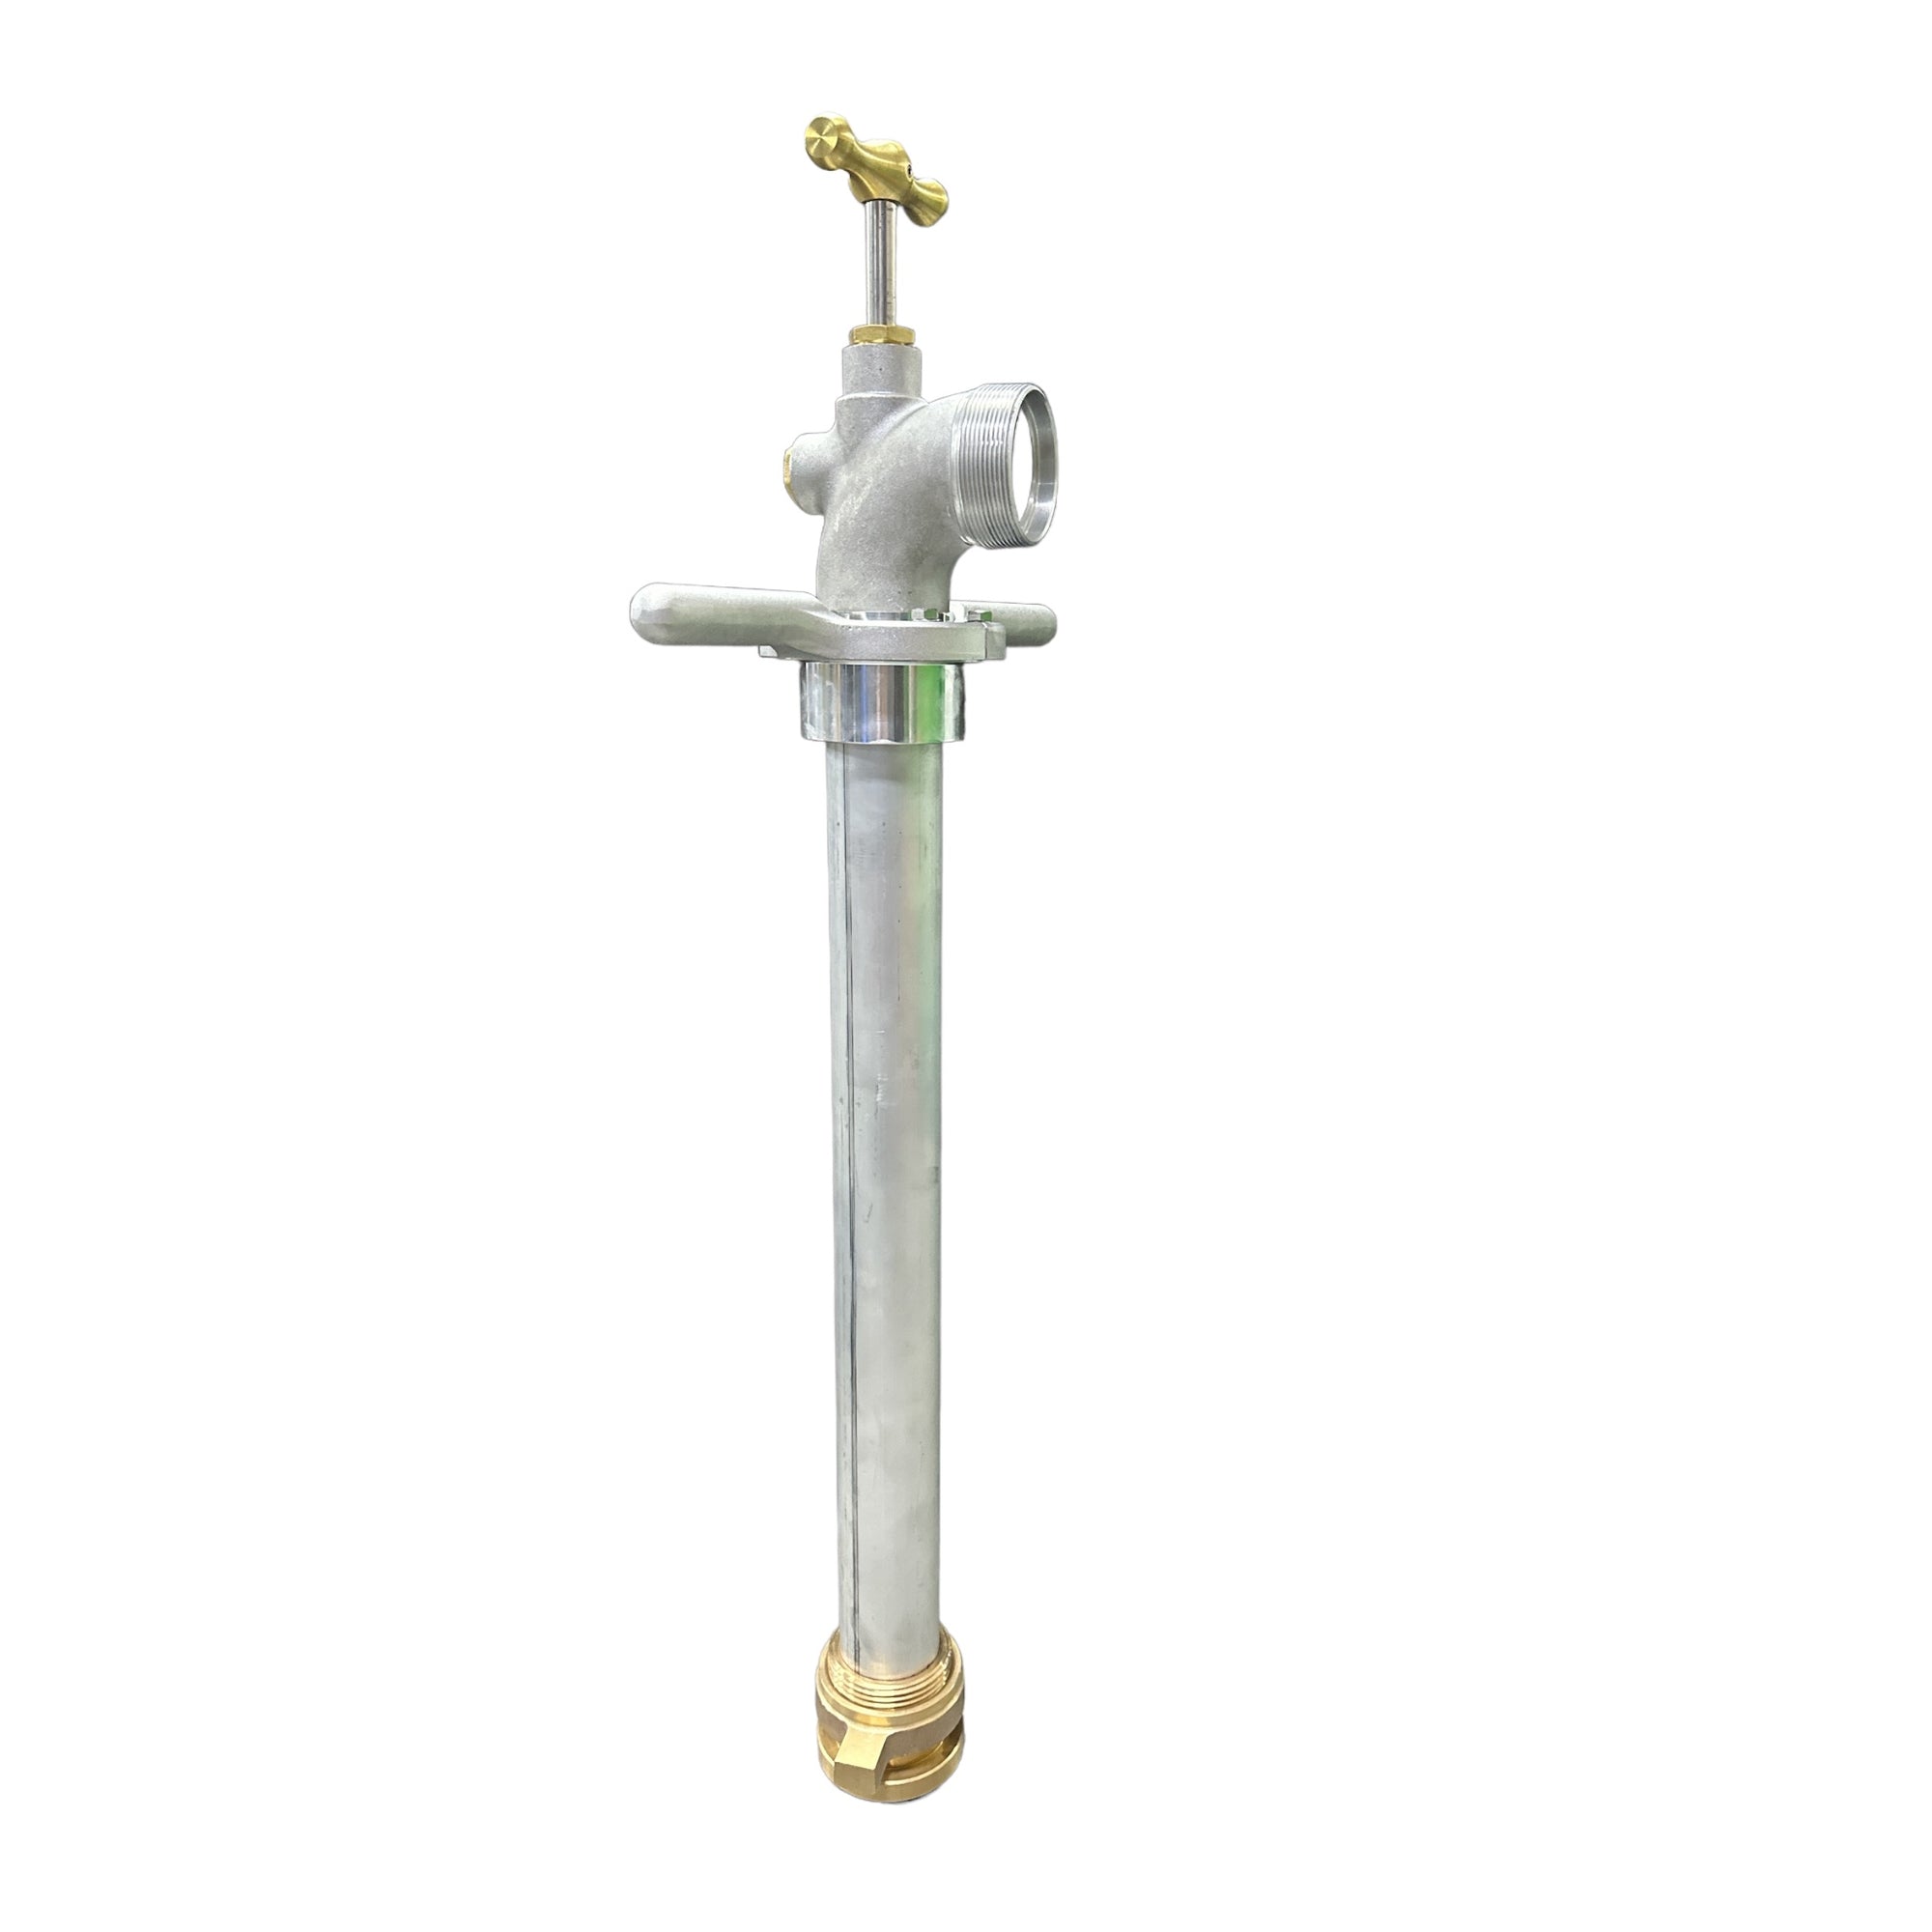 FIRE HYDRANT STANDPIPE Aluminium with 65mm Male BSP Outlet